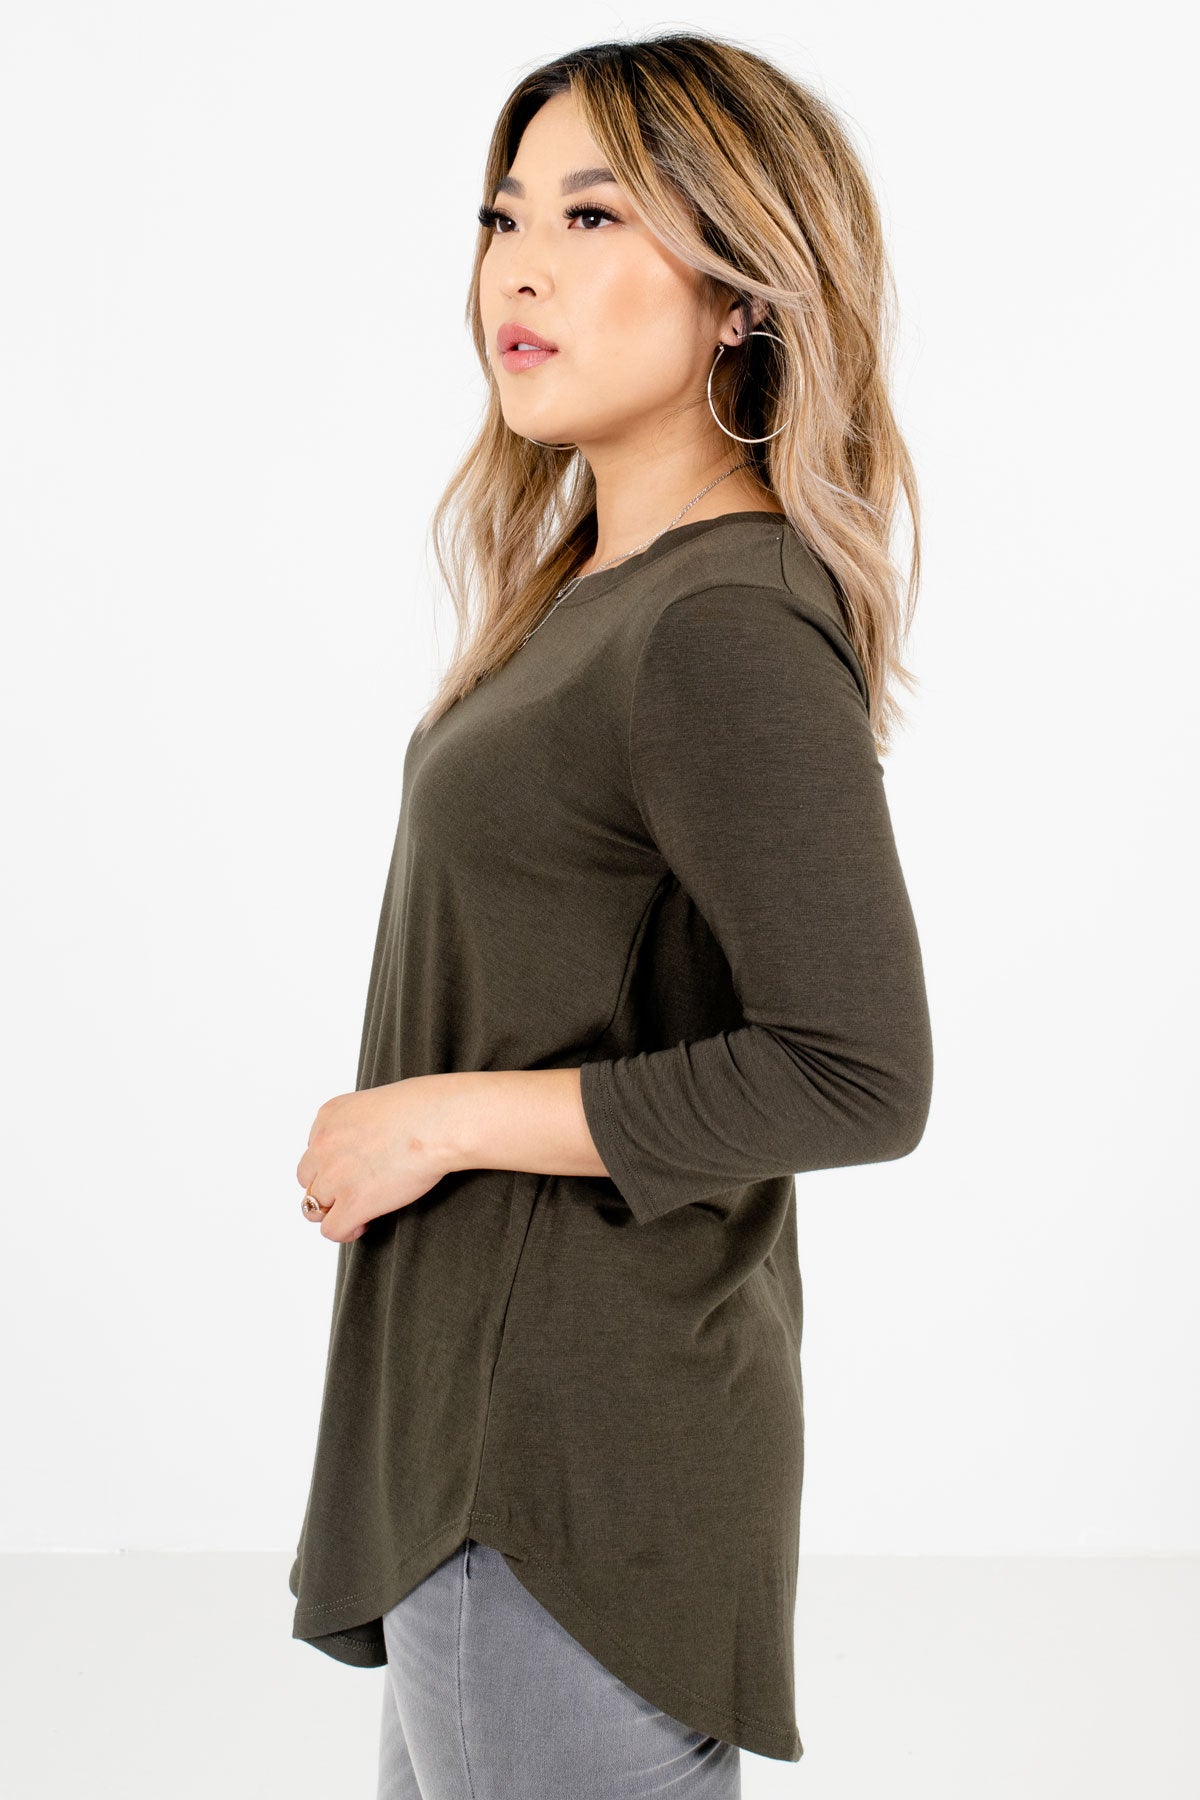 Olive Green Boutique Layering Tops for Women